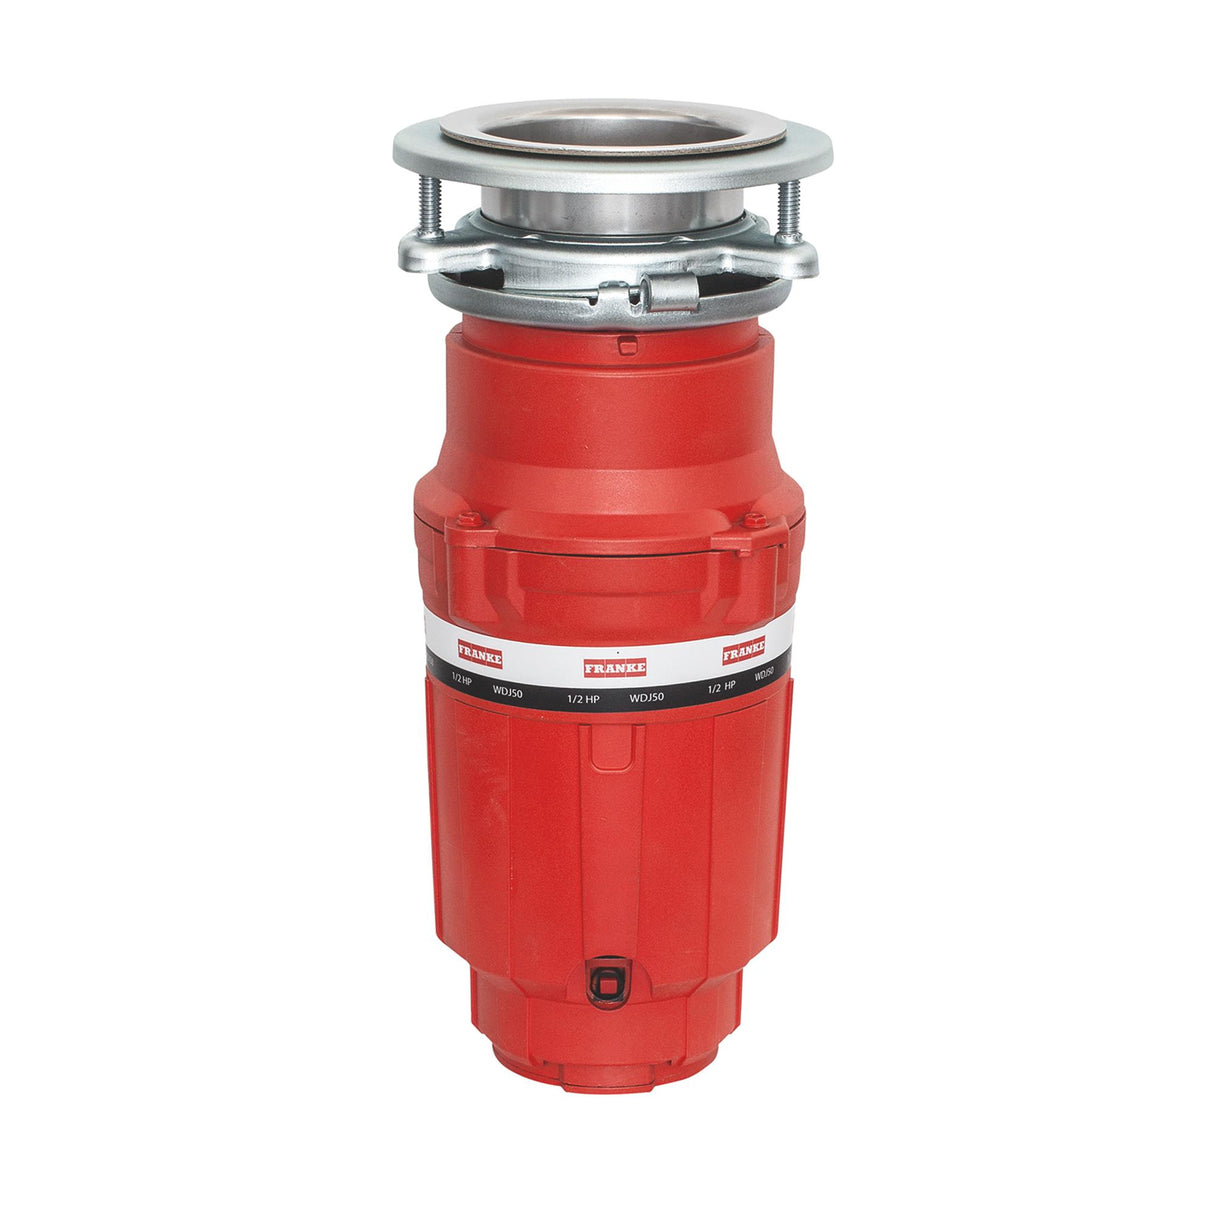 FRANKE WDJ50 1/2 Horse Power Compact Waste Disposer Continuous Feed Torque Master 2600 RPM Jam-Resistant DC Motor in Red/Chrome